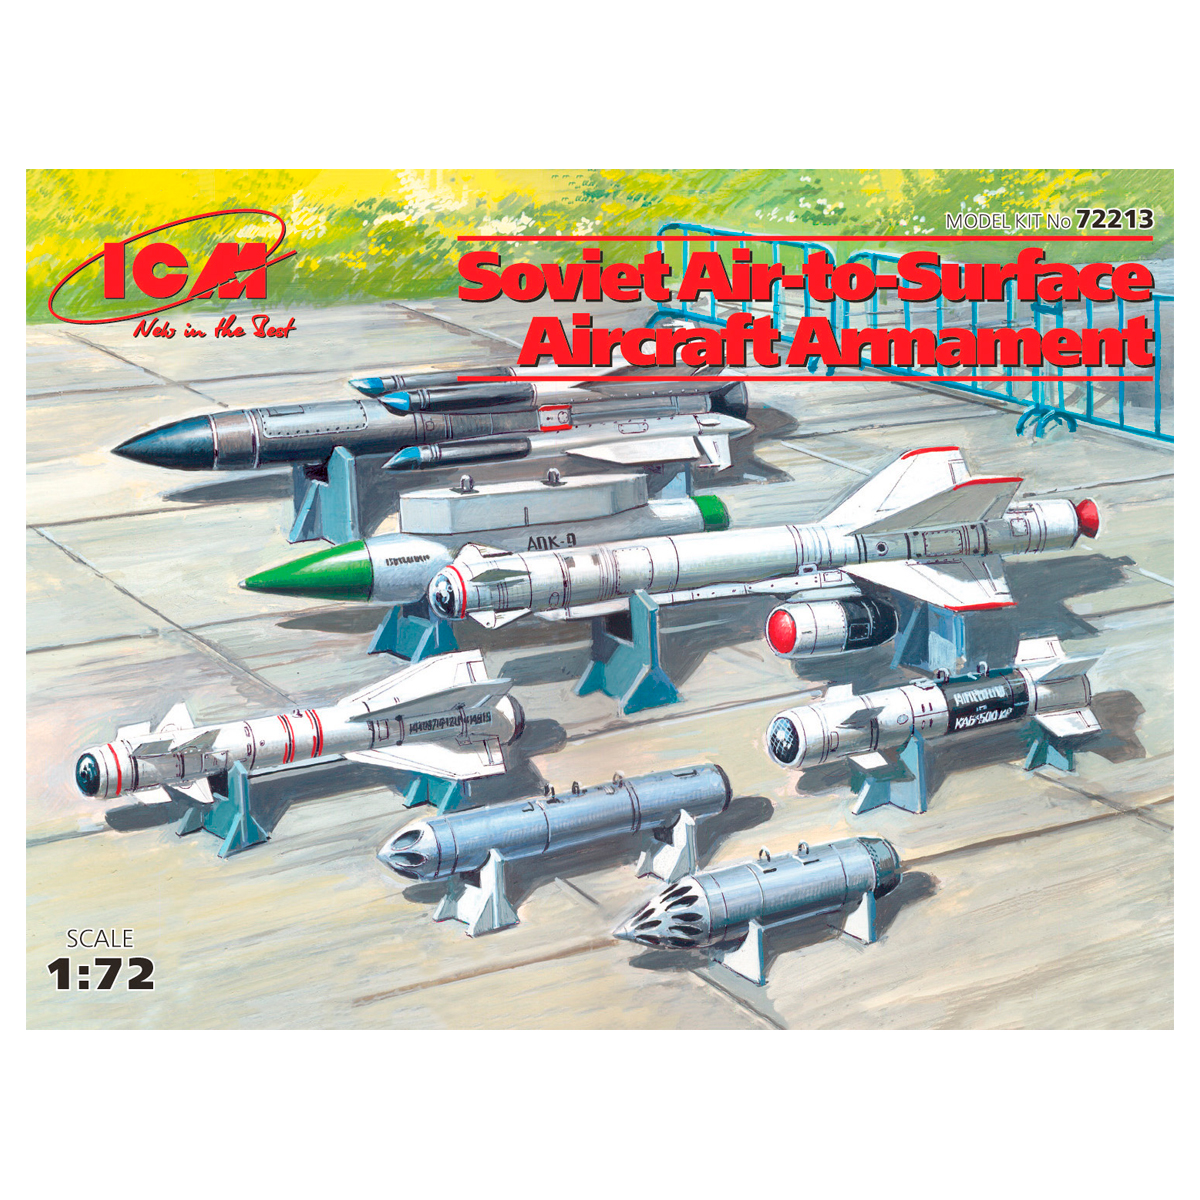 Soviet Air-to-Surface Aircraft Armament (X-29T, X-31P, X-59M missiles, B-13L, B-8M1 rocket containers, KAB-500Kr bombs) 1/72